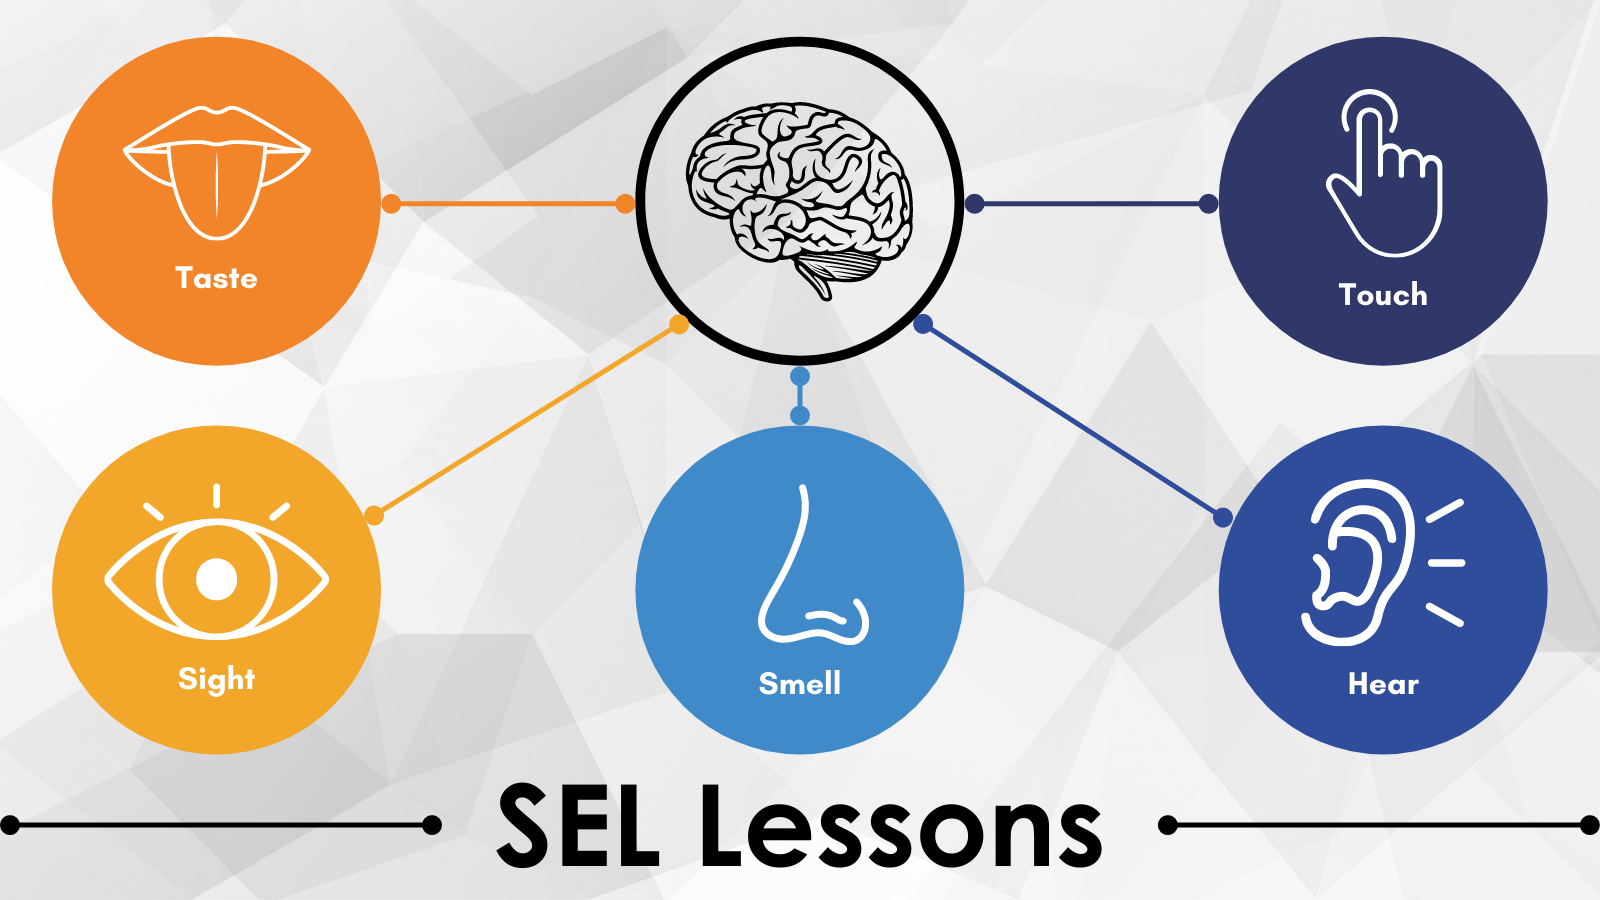 Lessons for SEL 